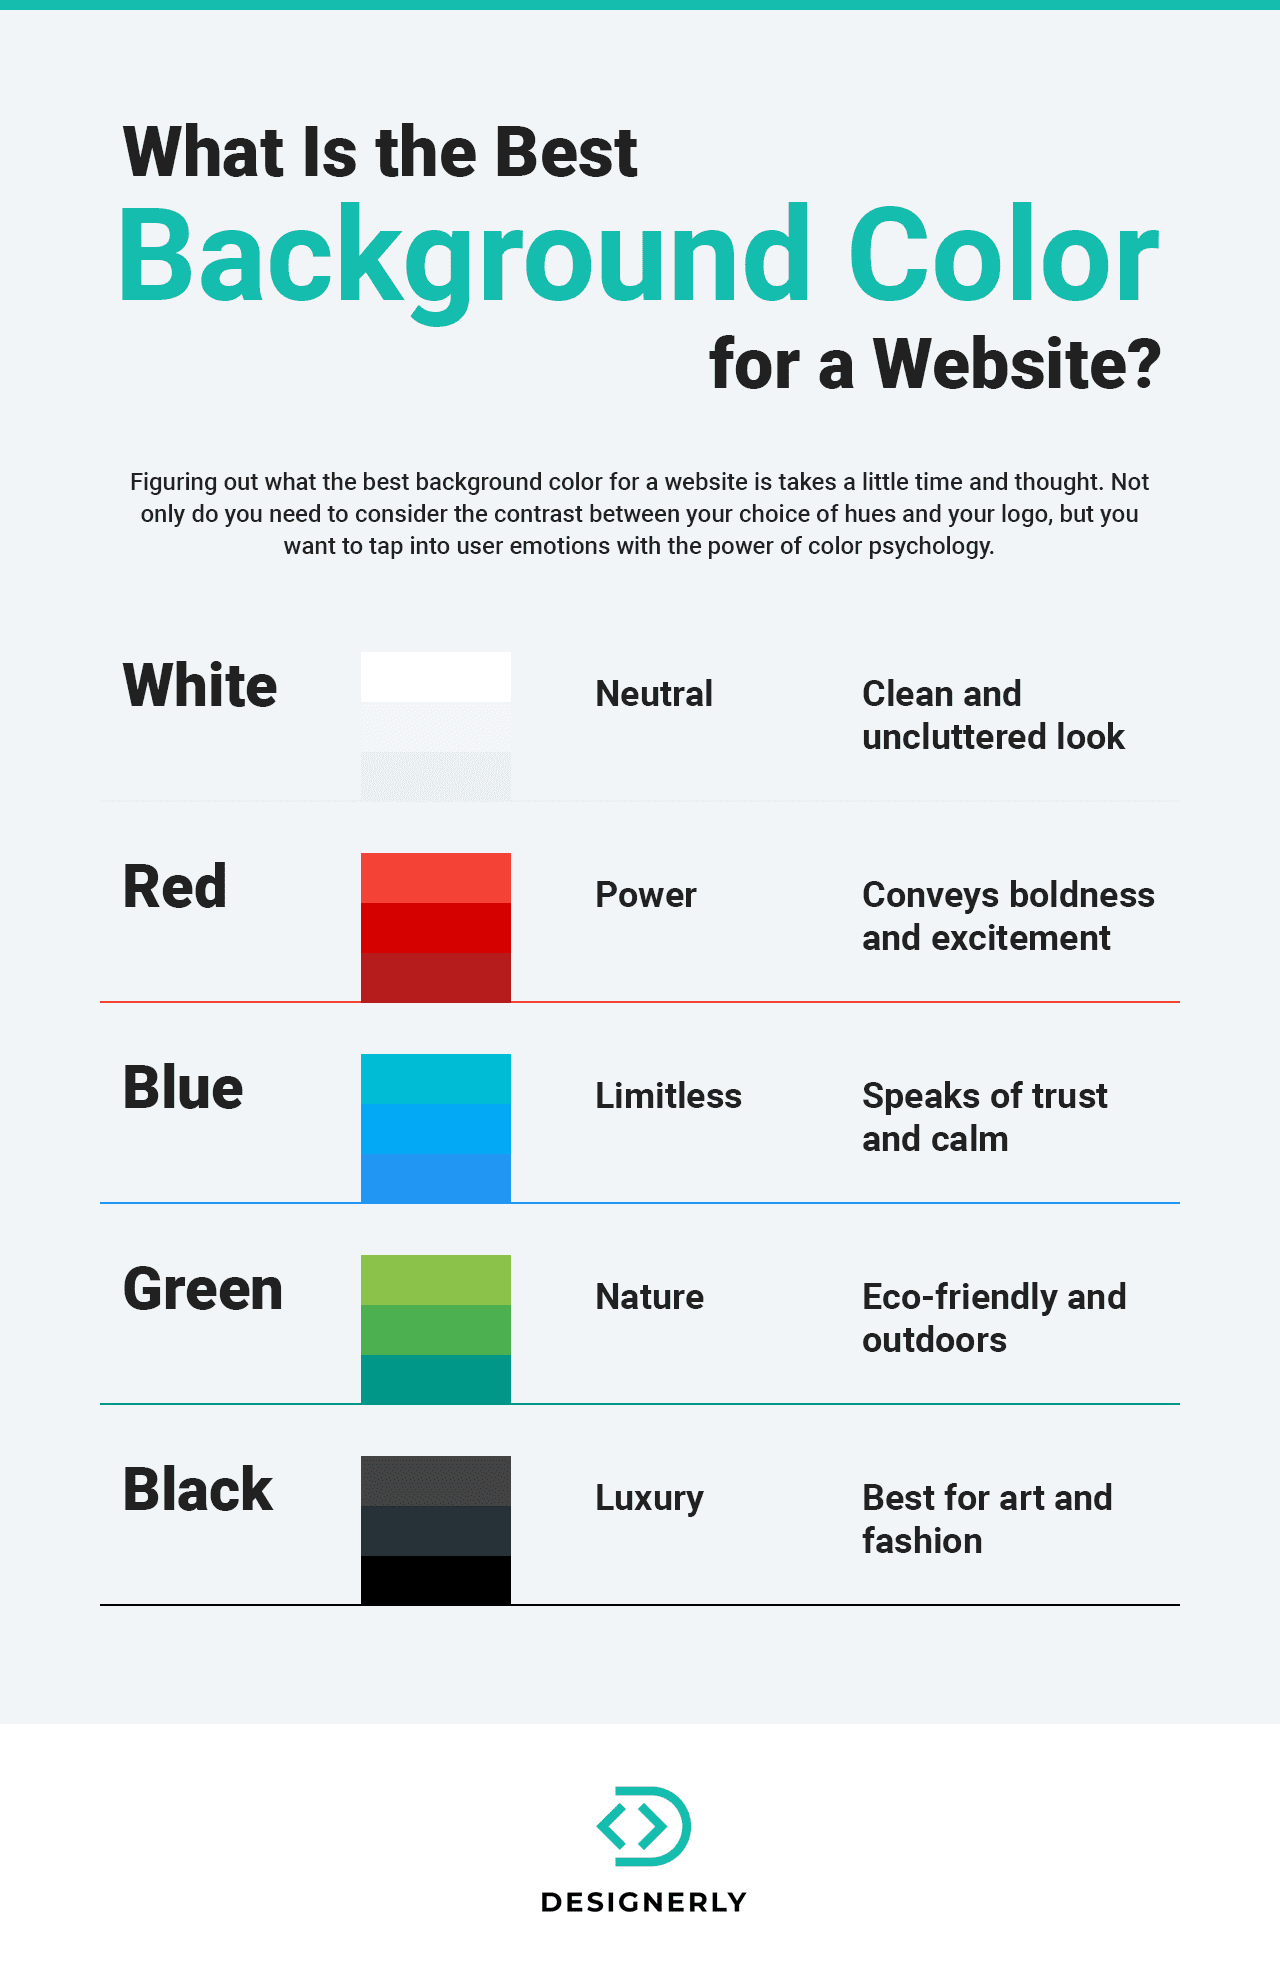 What Is the Best Background Color for a Website? - Designerly